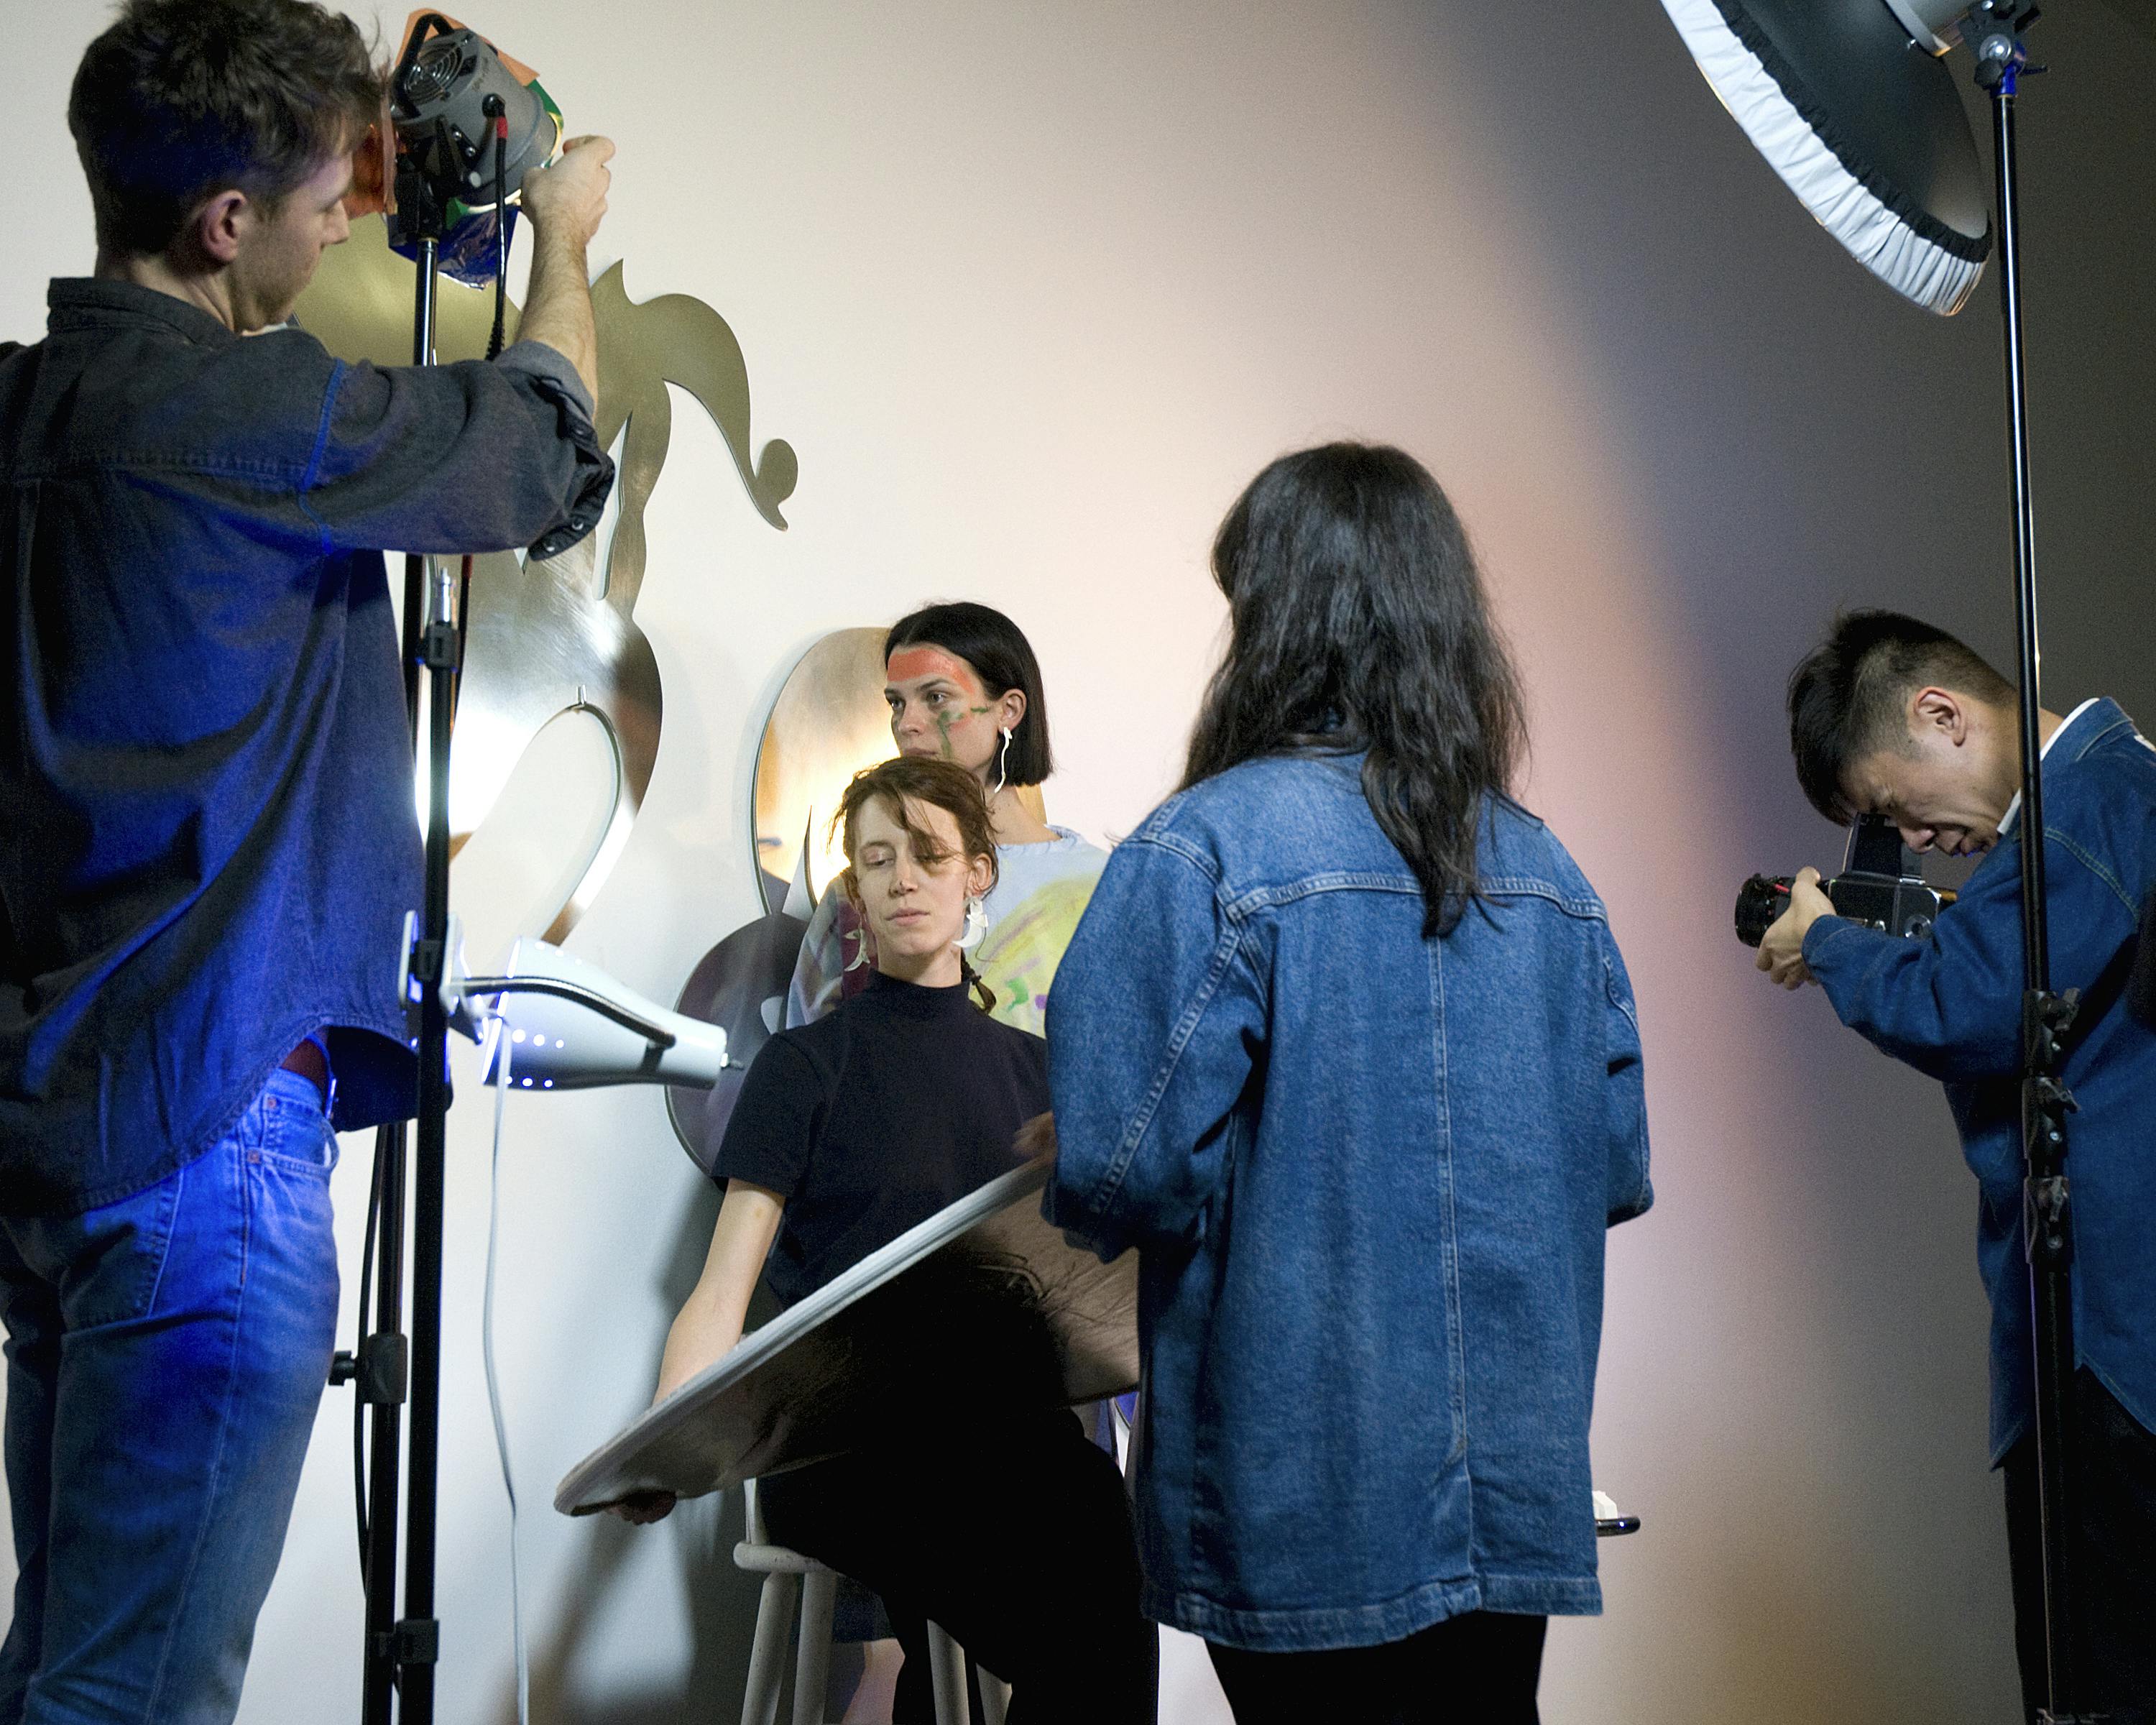 This is a close-up view of a performance taking place inside the gallery space. A man is adjusting the stage light, and another man taking a photograph of a seated woman in the middle.